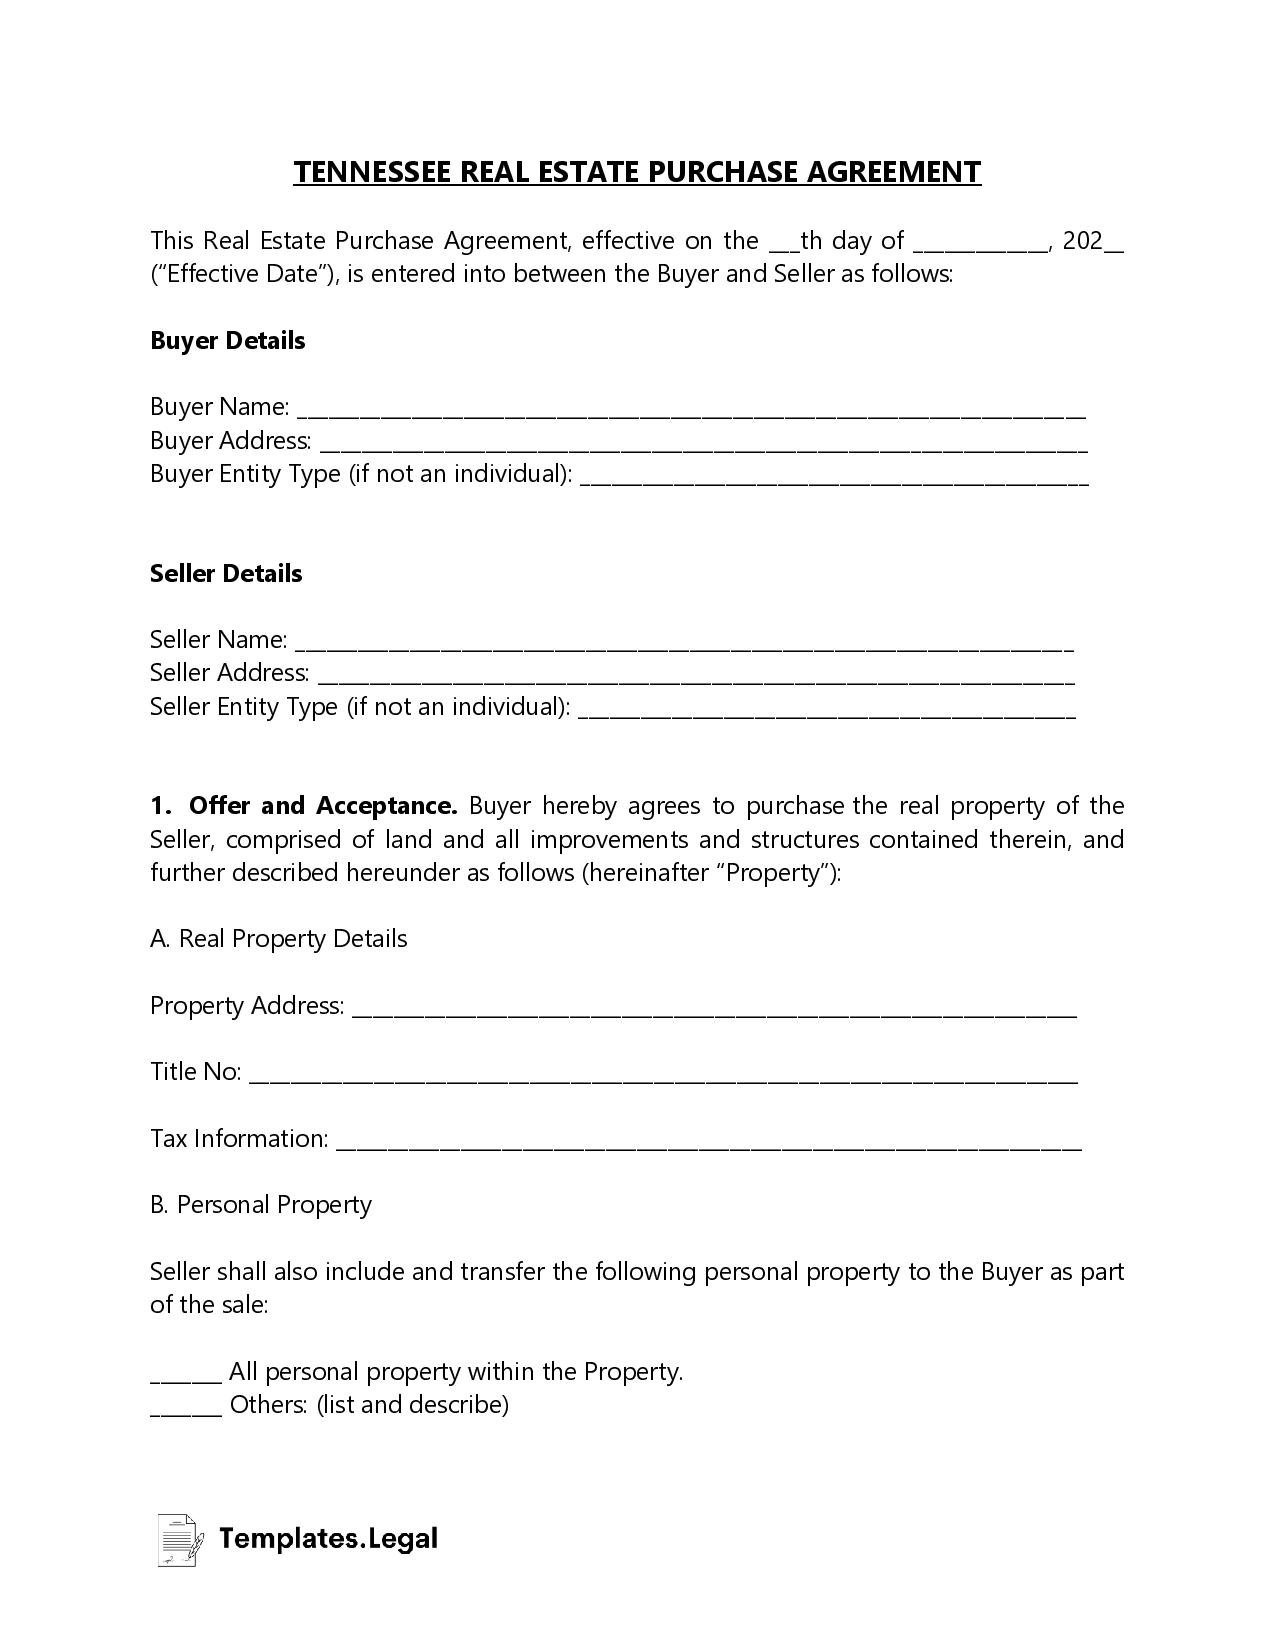 Tennessee Real Estate Purchase Agreement - Templates.Legal